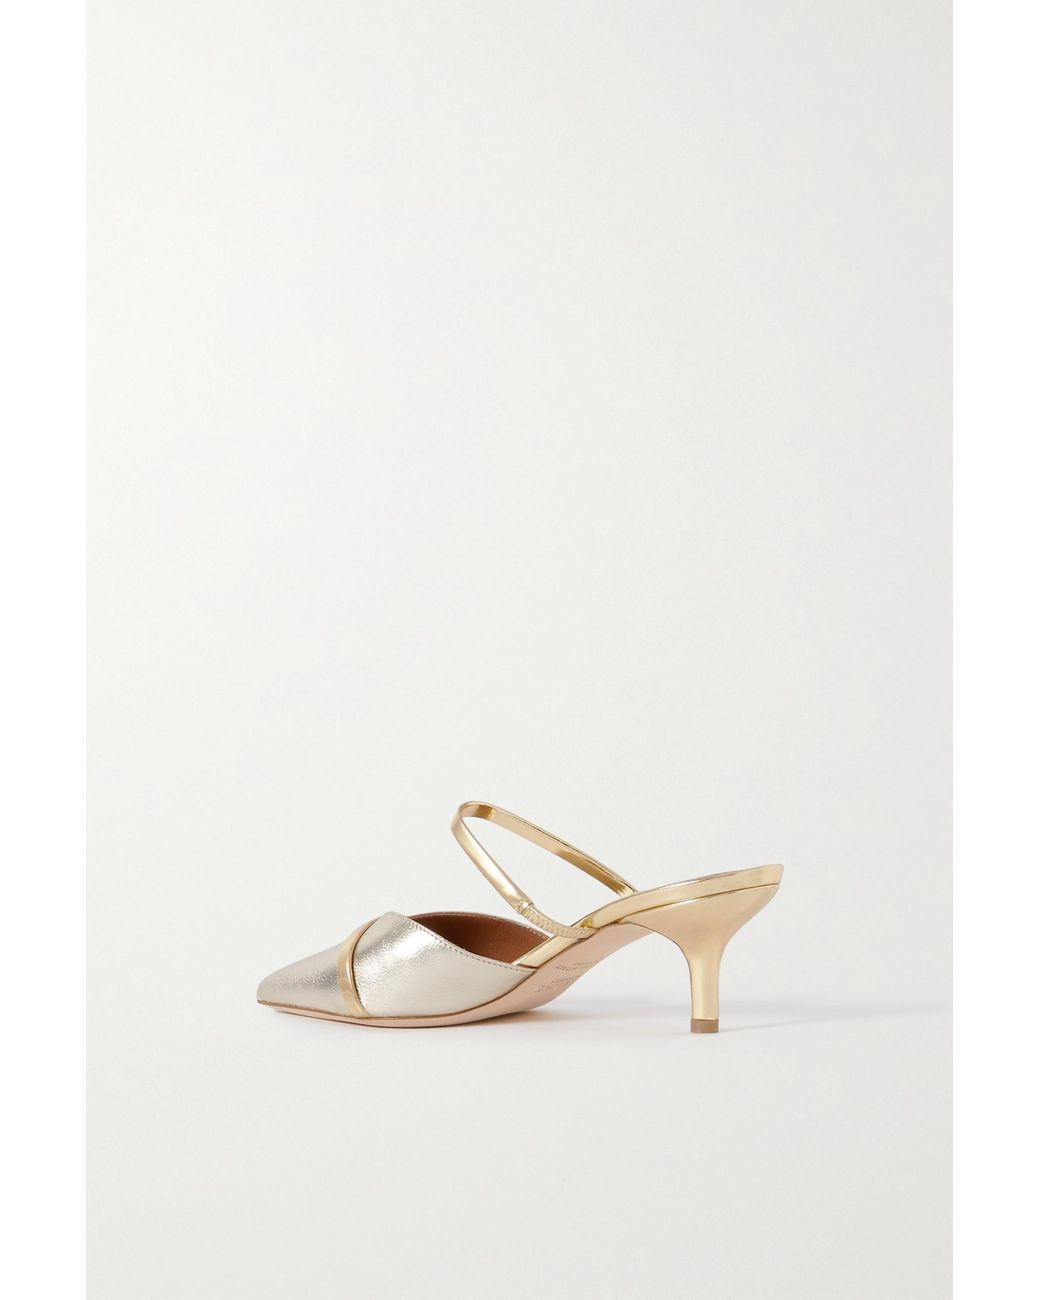 Malone Souliers Frankie 45 Metallic Leather Pumps in Natural | Lyst  Australia